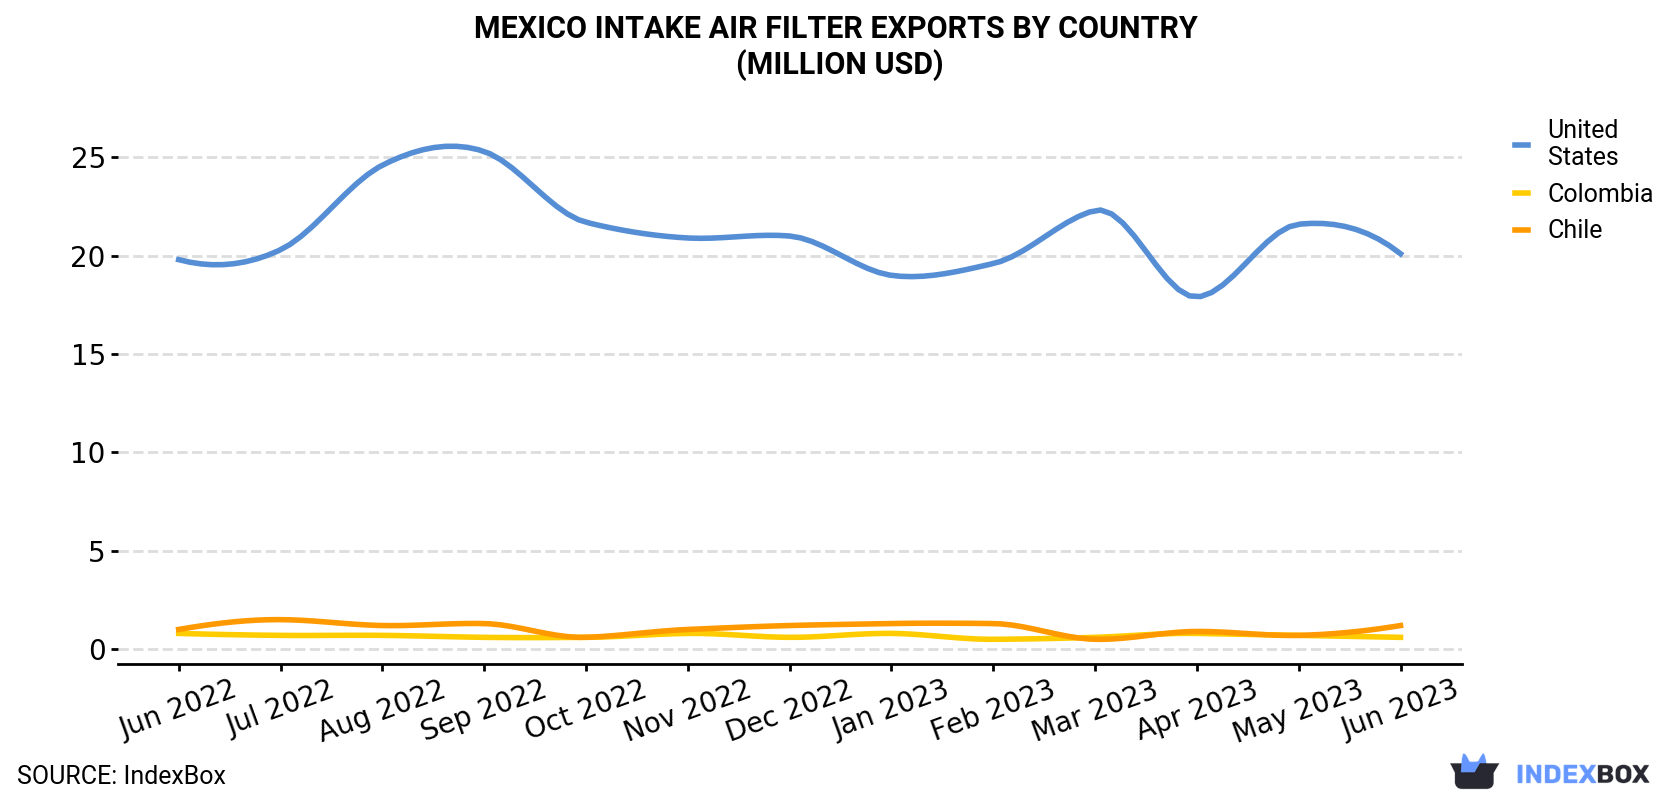 Mexico Intake Air Filter Exports By Country (Million USD)